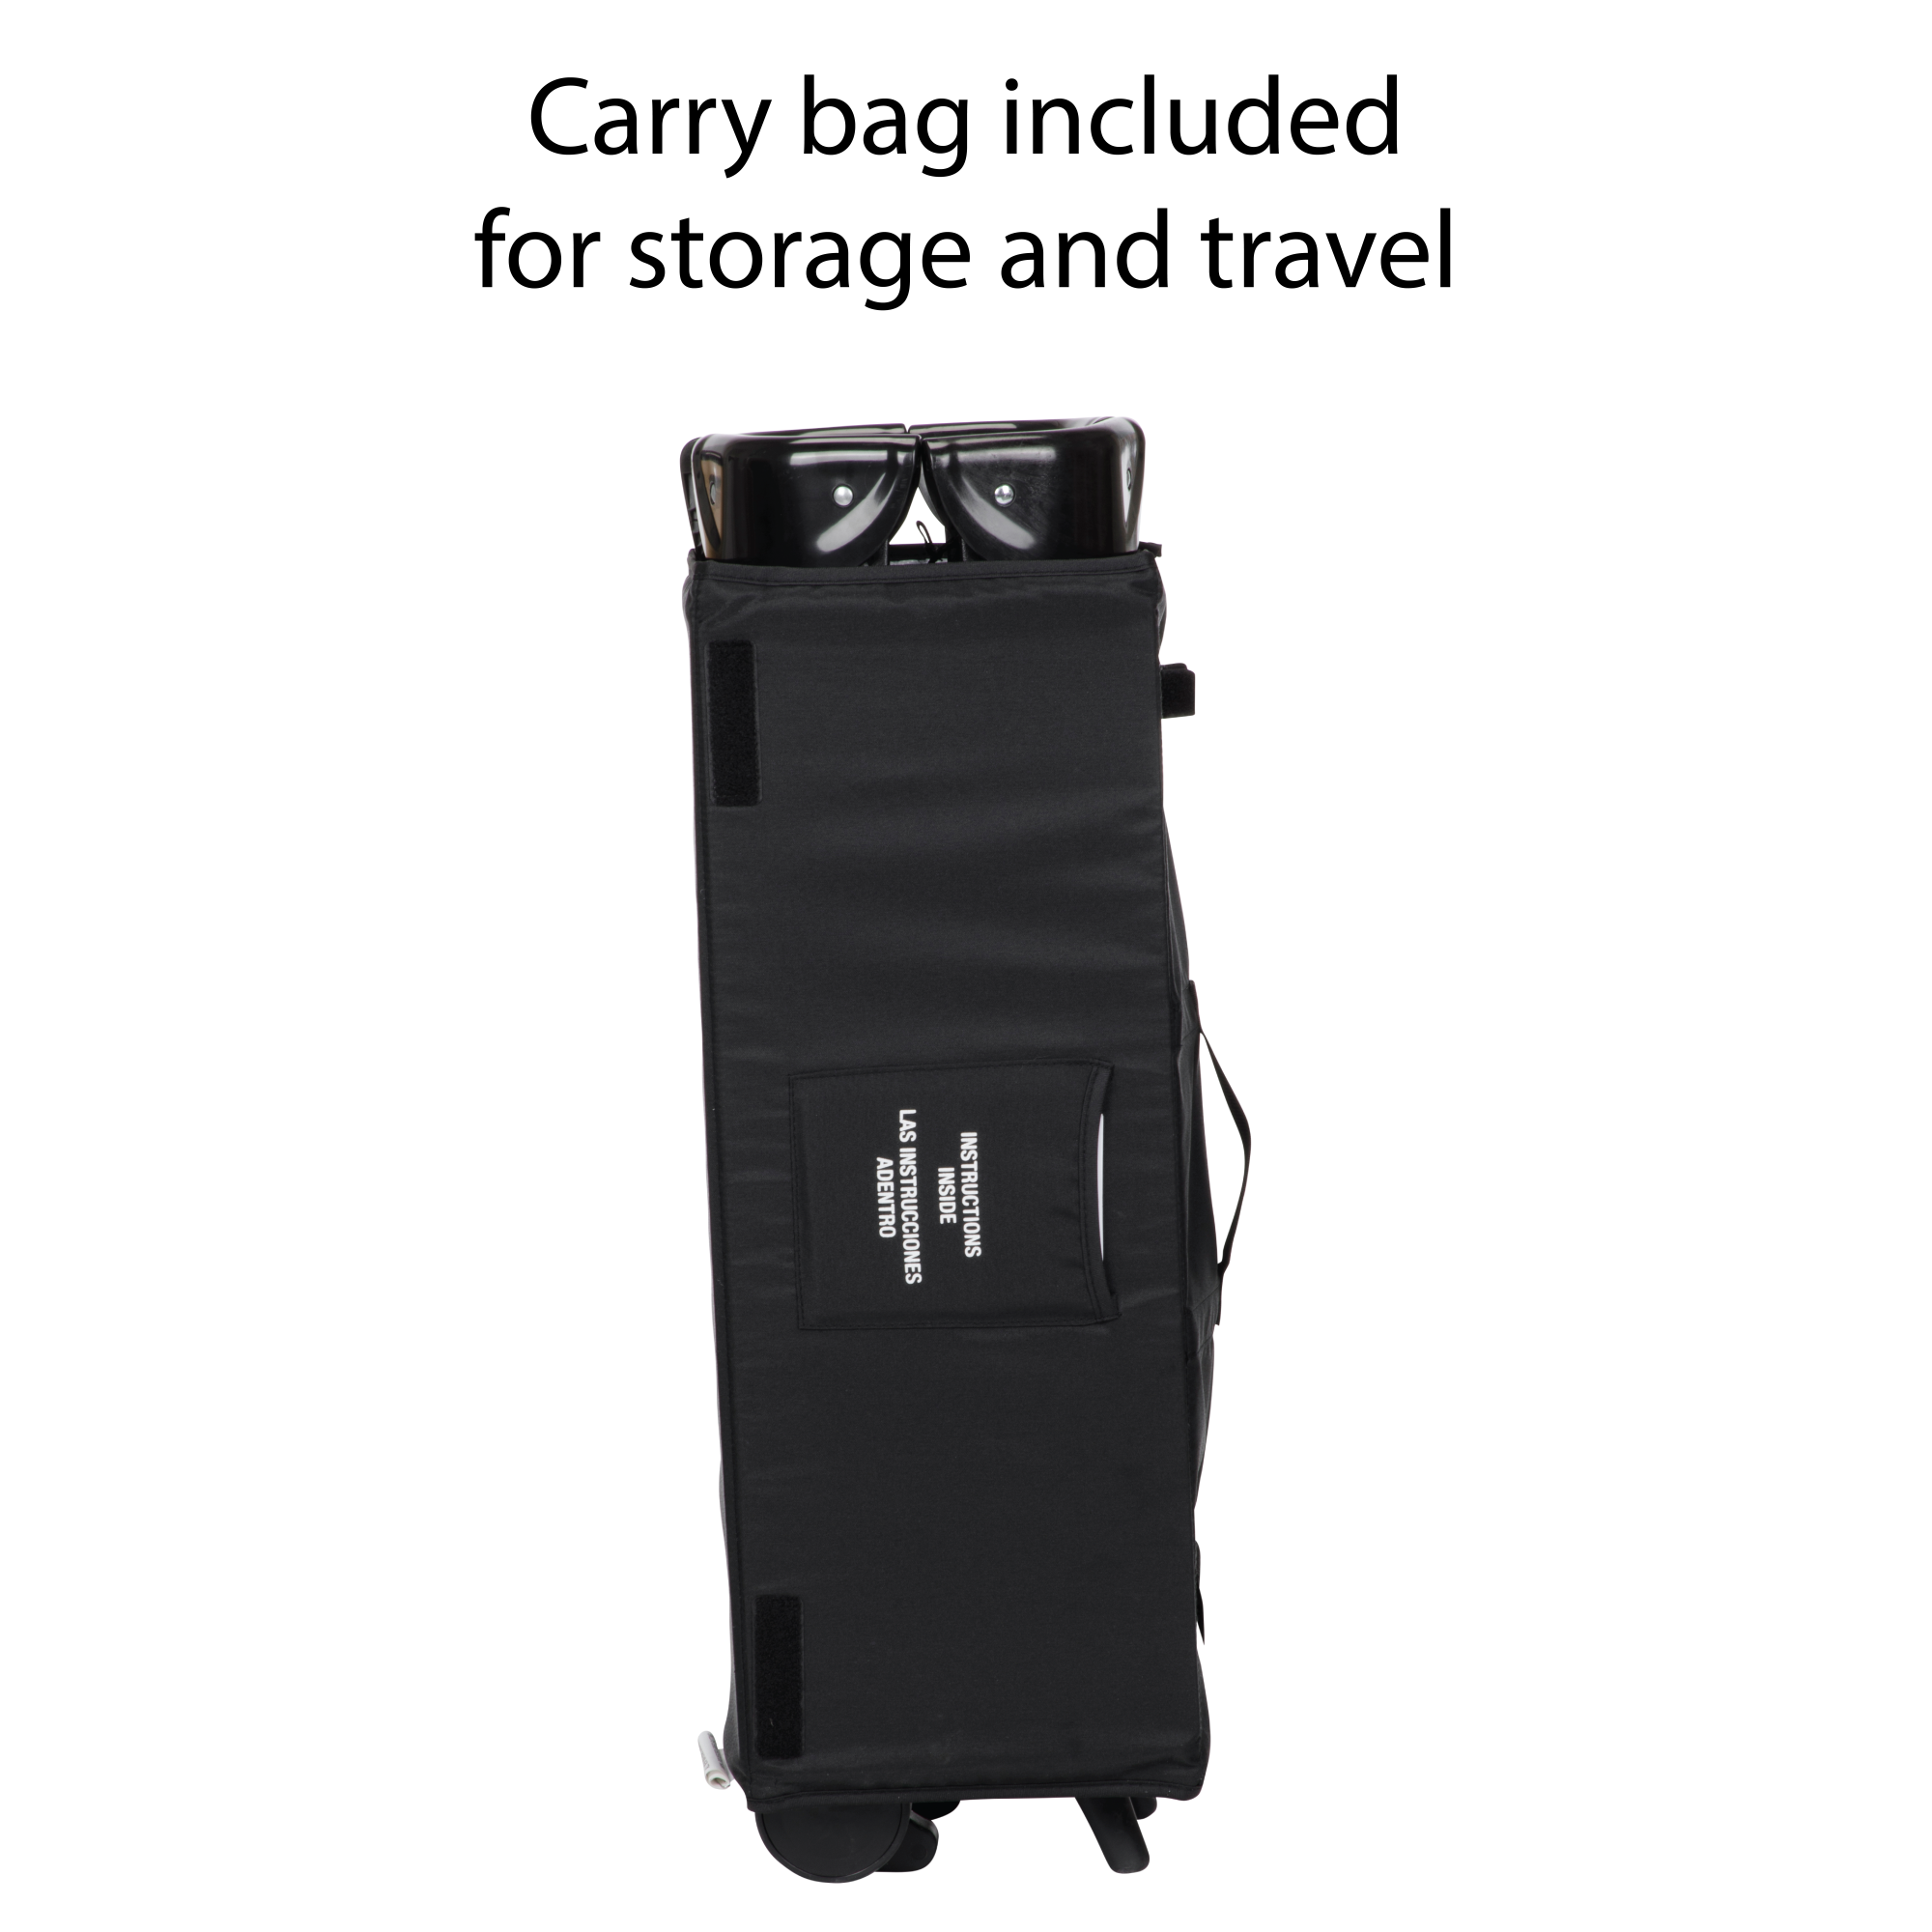 Play-and-Stay Play Yard - carry bag included for storage and travel